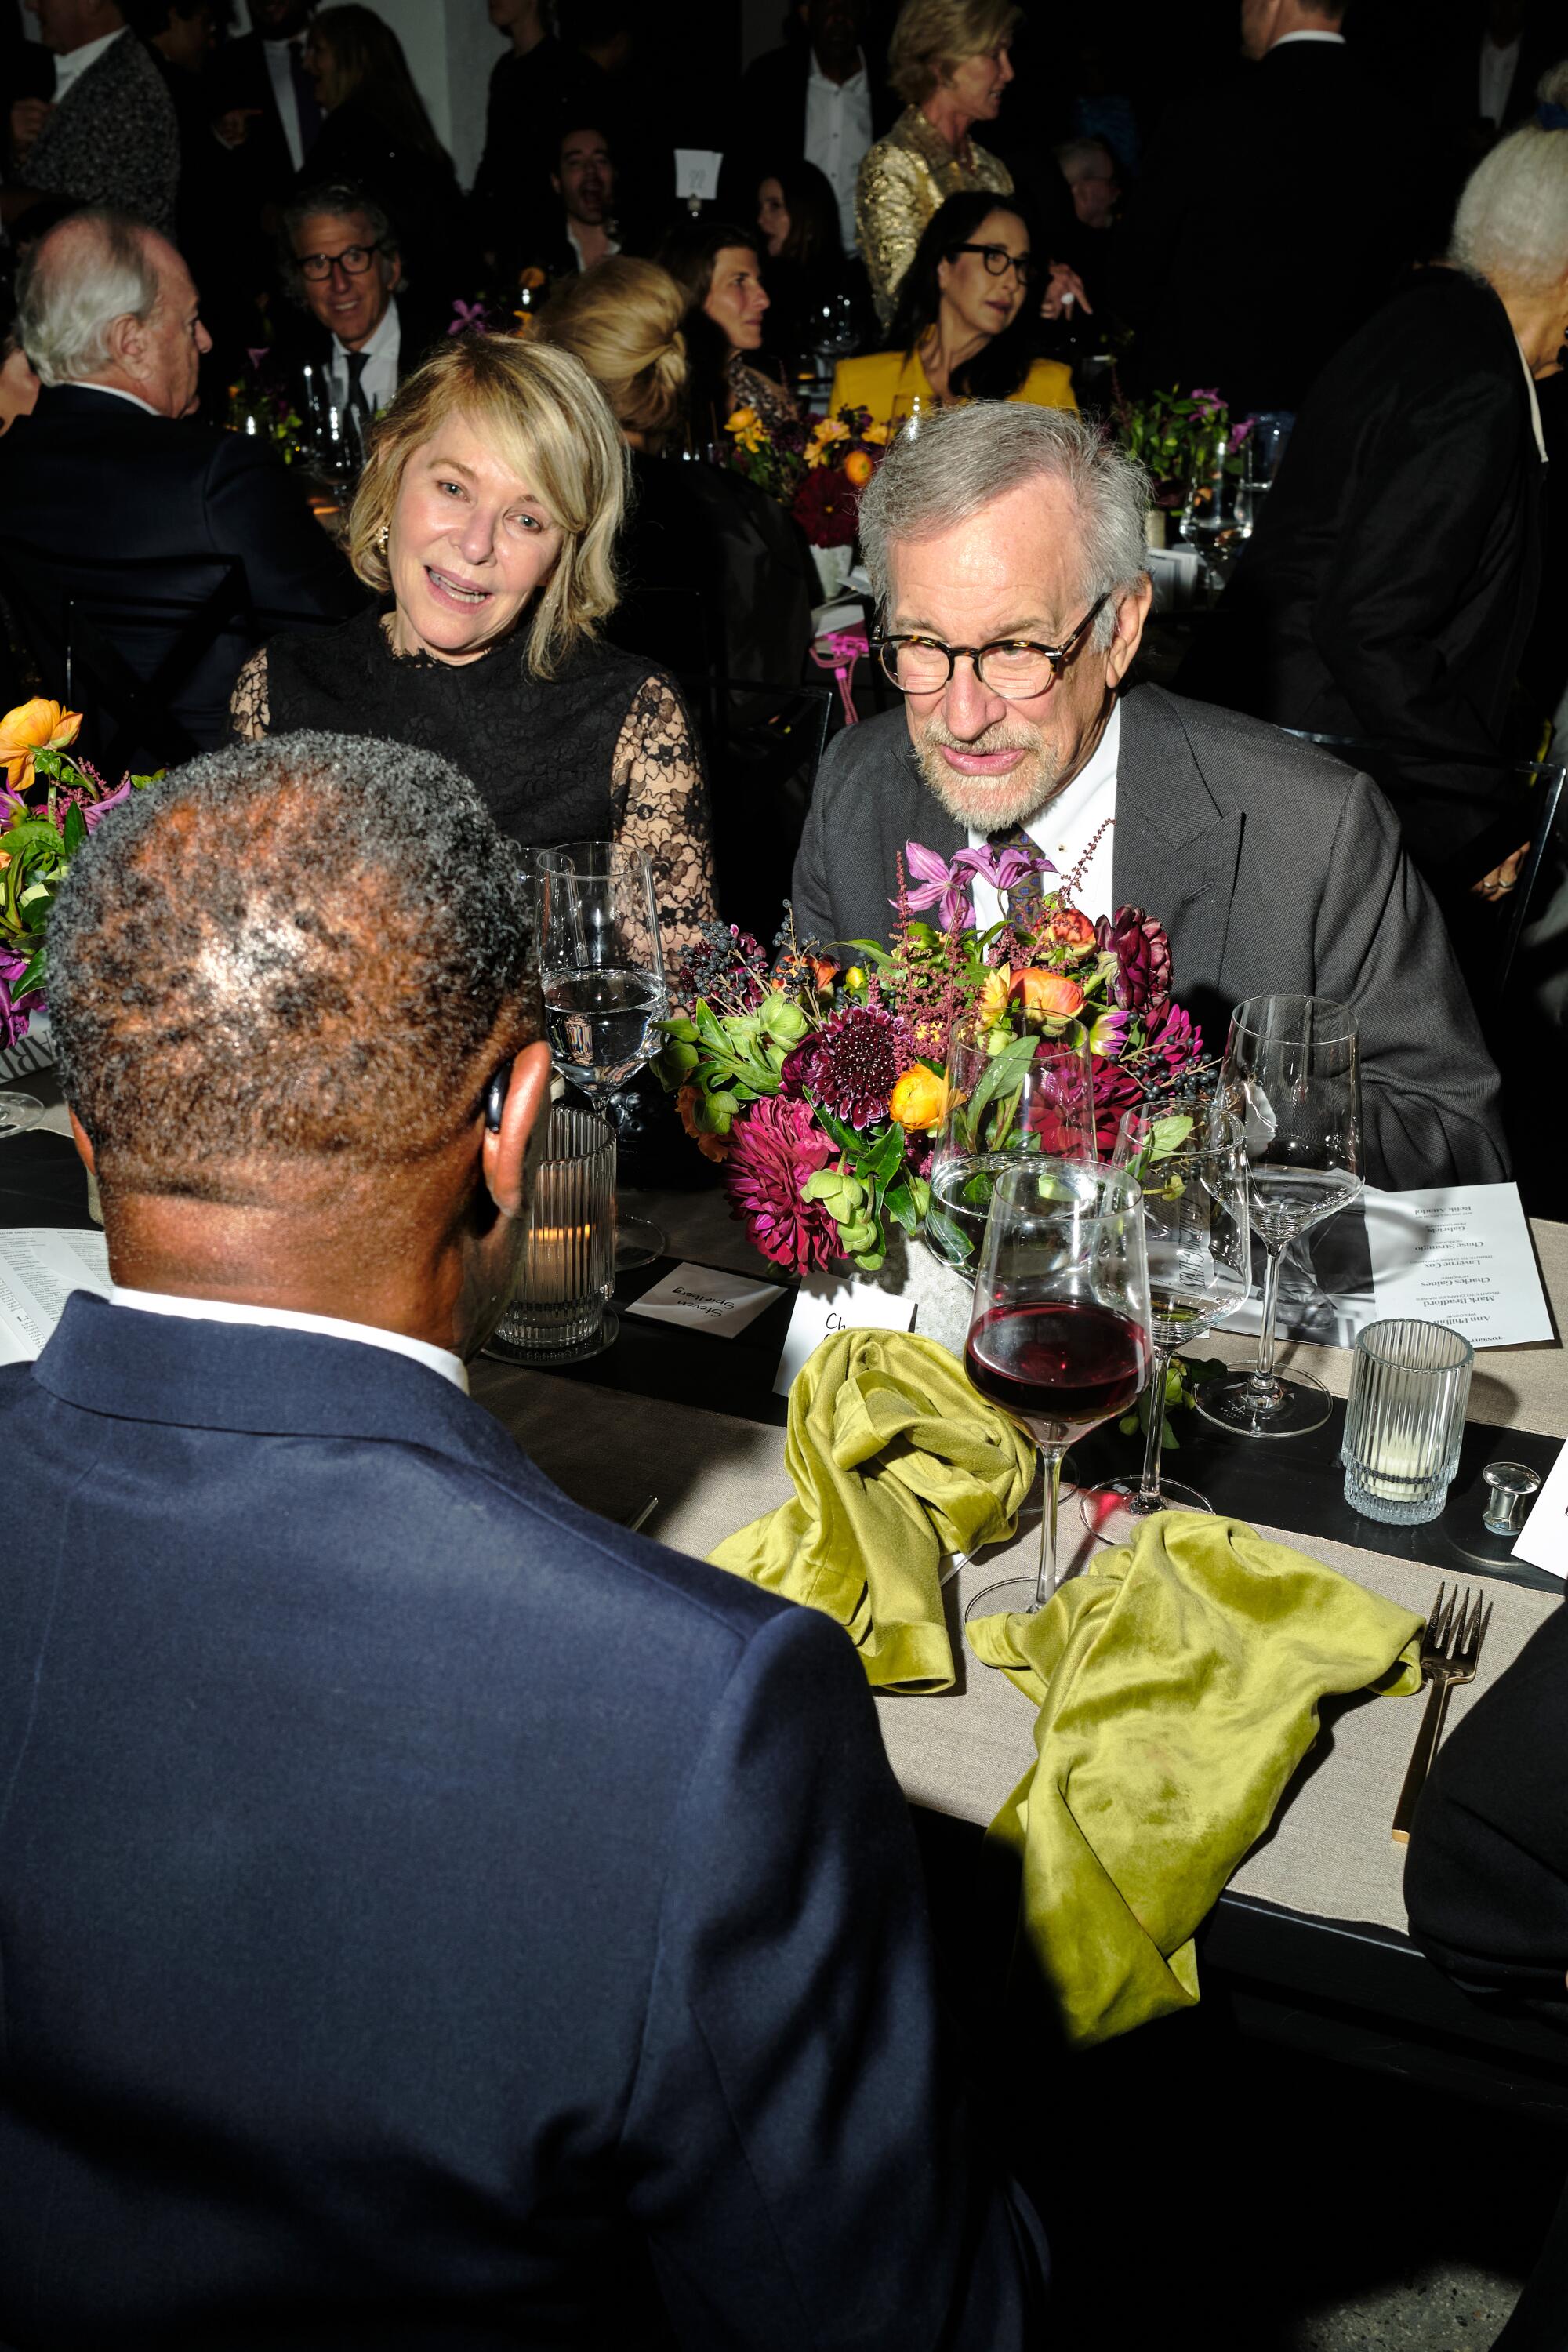 Kate Capshaw and Steven Spielberg seated for dinner at the Hammer gala.